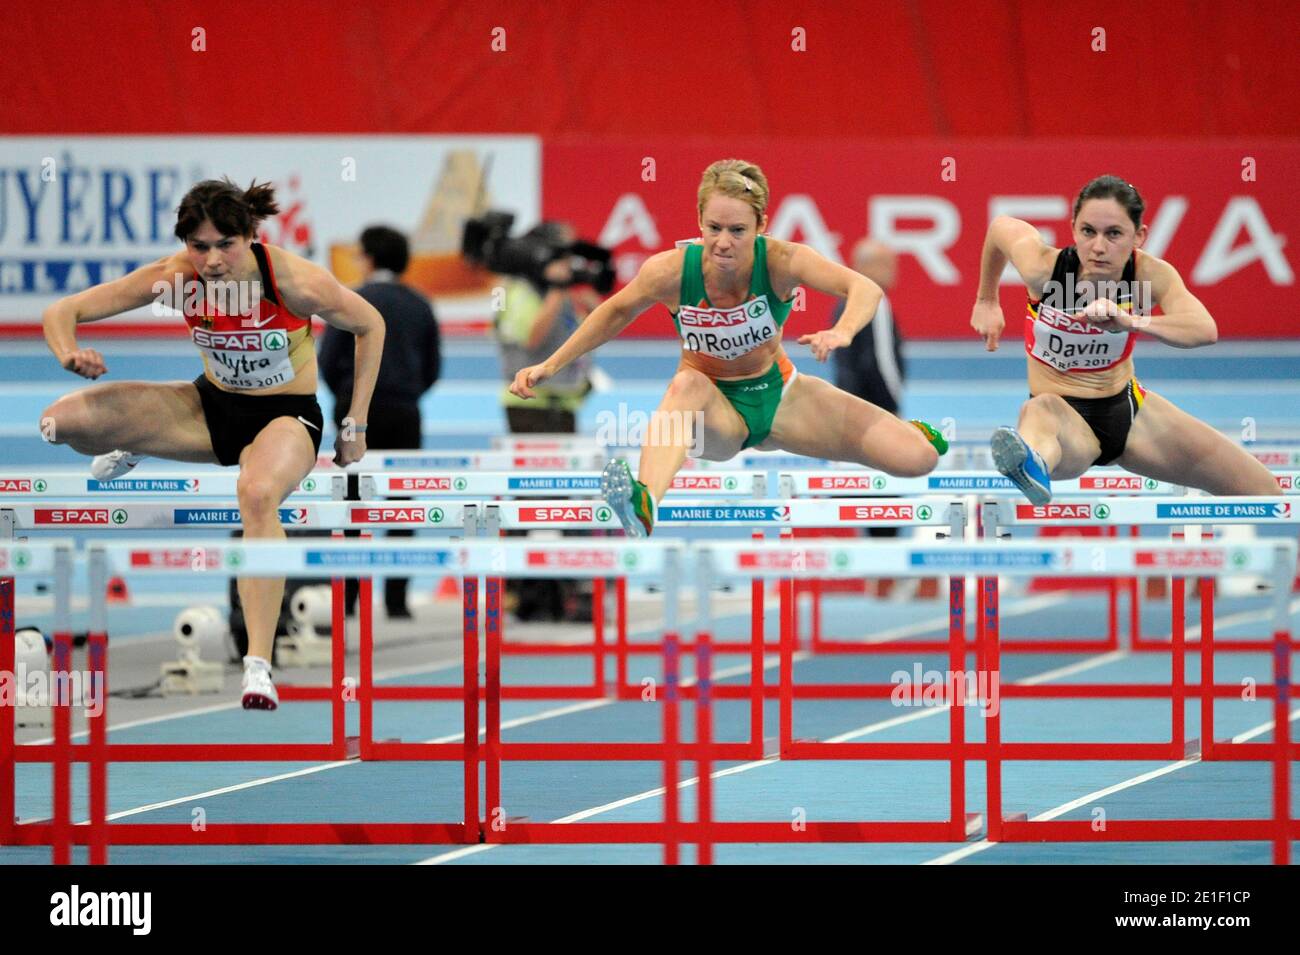 Carolin Nytra of Germany, Derval O'Rourke of Ireland and Elisabeth Davin of Belgium compete in the Women's 60m hurdles heat 4 during day 1 of the 31st European Athletics Indoor Championships at the Palais Omnisports de Paris-Bercy in Paris, France on March 4, 2011. Photo by Stephane Reix/ABACAPRESS.COM. Stock Photo